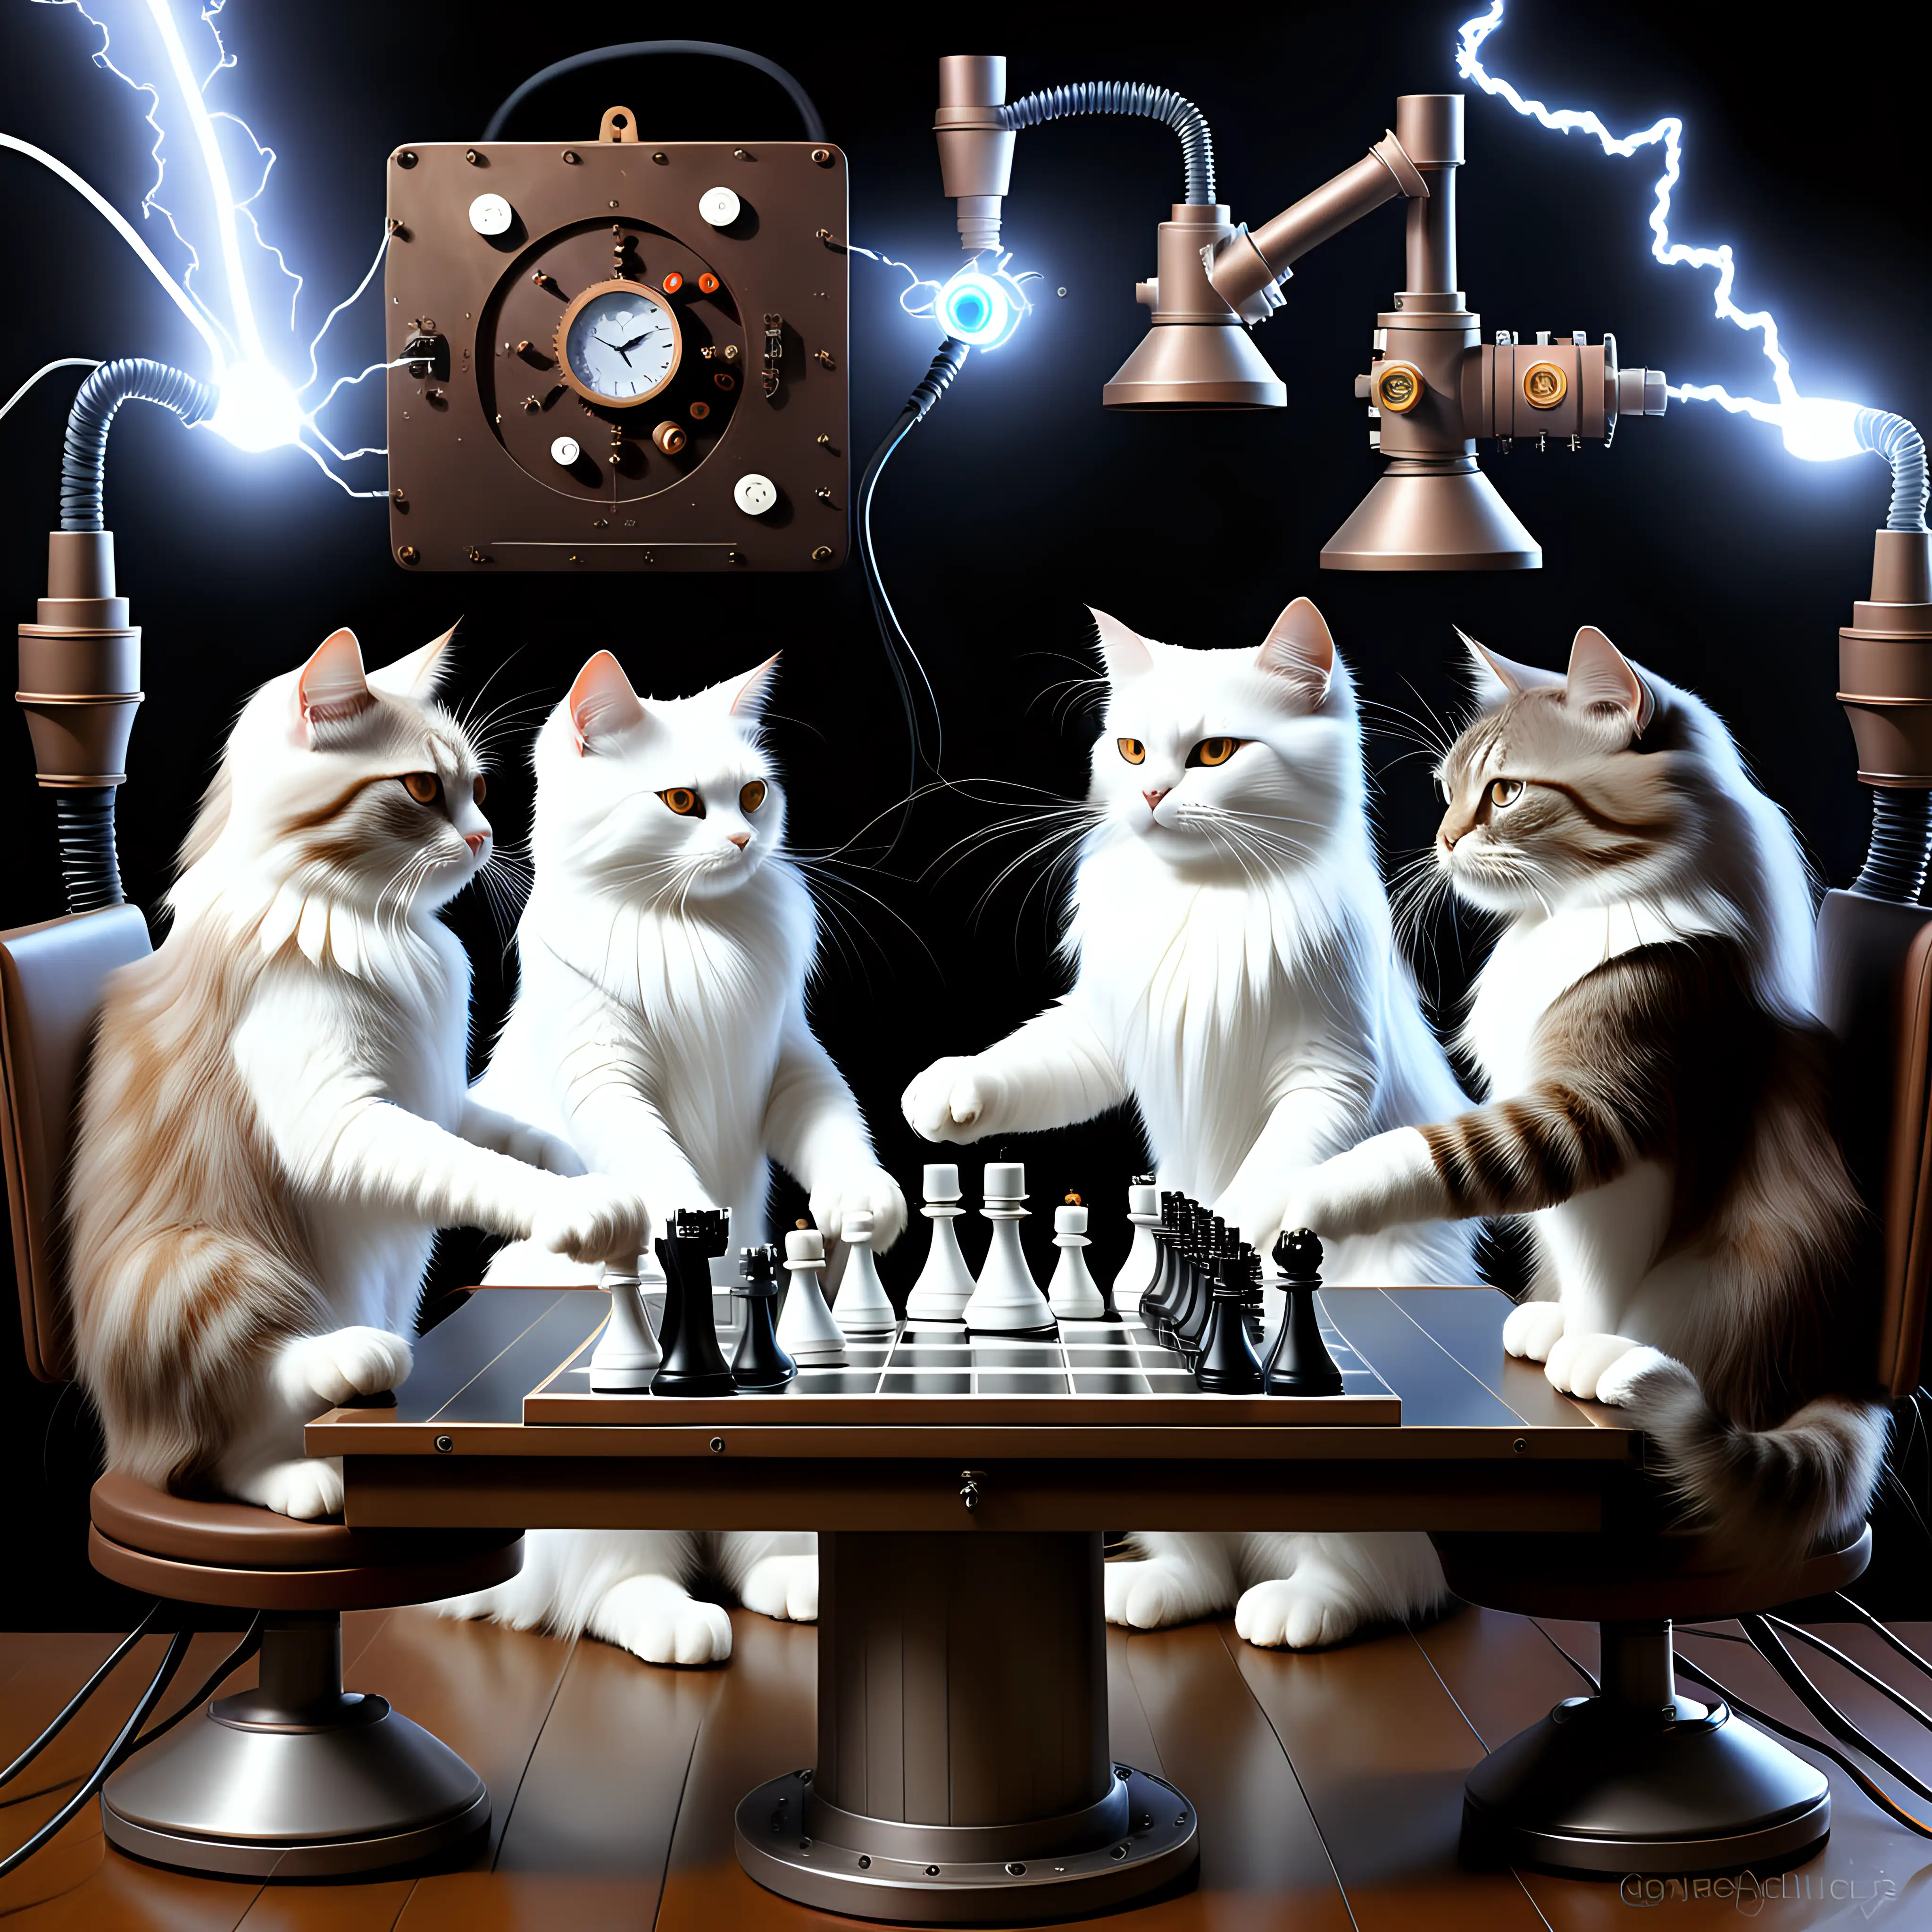 surrealistic painting of exactly 4 longhaired steampunk cats playing chess in an electric labo with a tesla coil. 2 cats are white. 1 cat is black and white. 1 cat is brown and white.